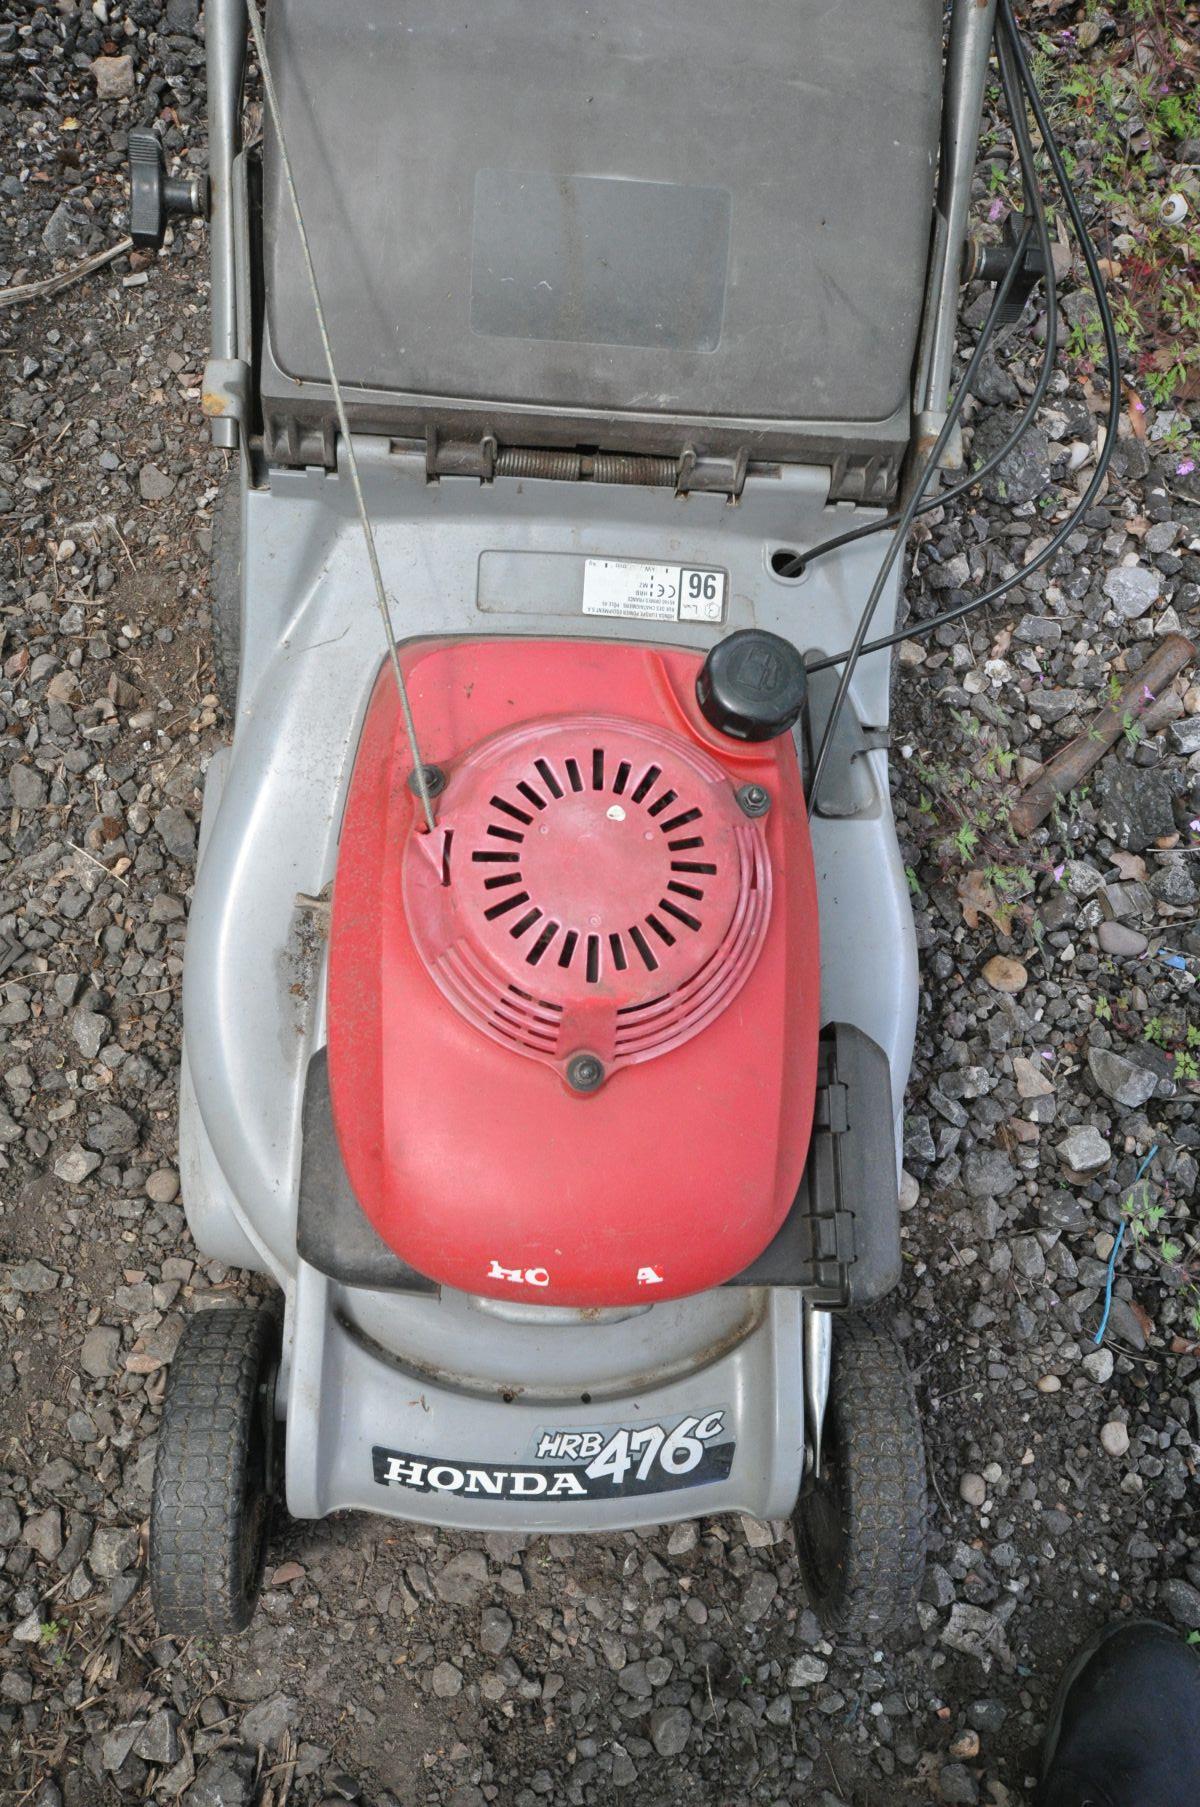 A HONDA HRB 476C PETROL LAWNMOWER with grass box (engine pulls freely but not fully tested) - Image 2 of 2